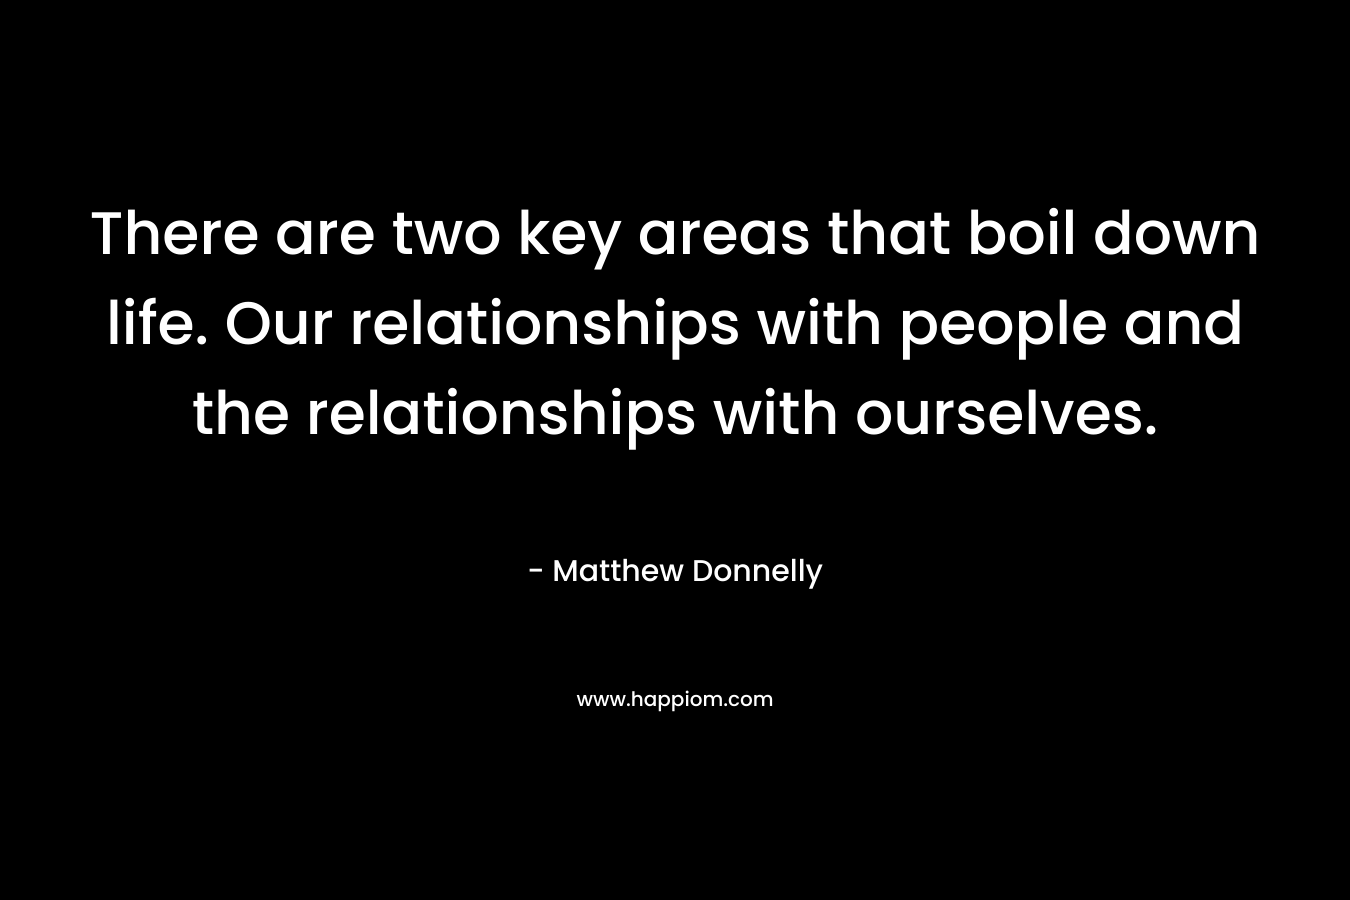 There are two key areas that boil down life. Our relationships with people and the relationships with ourselves.